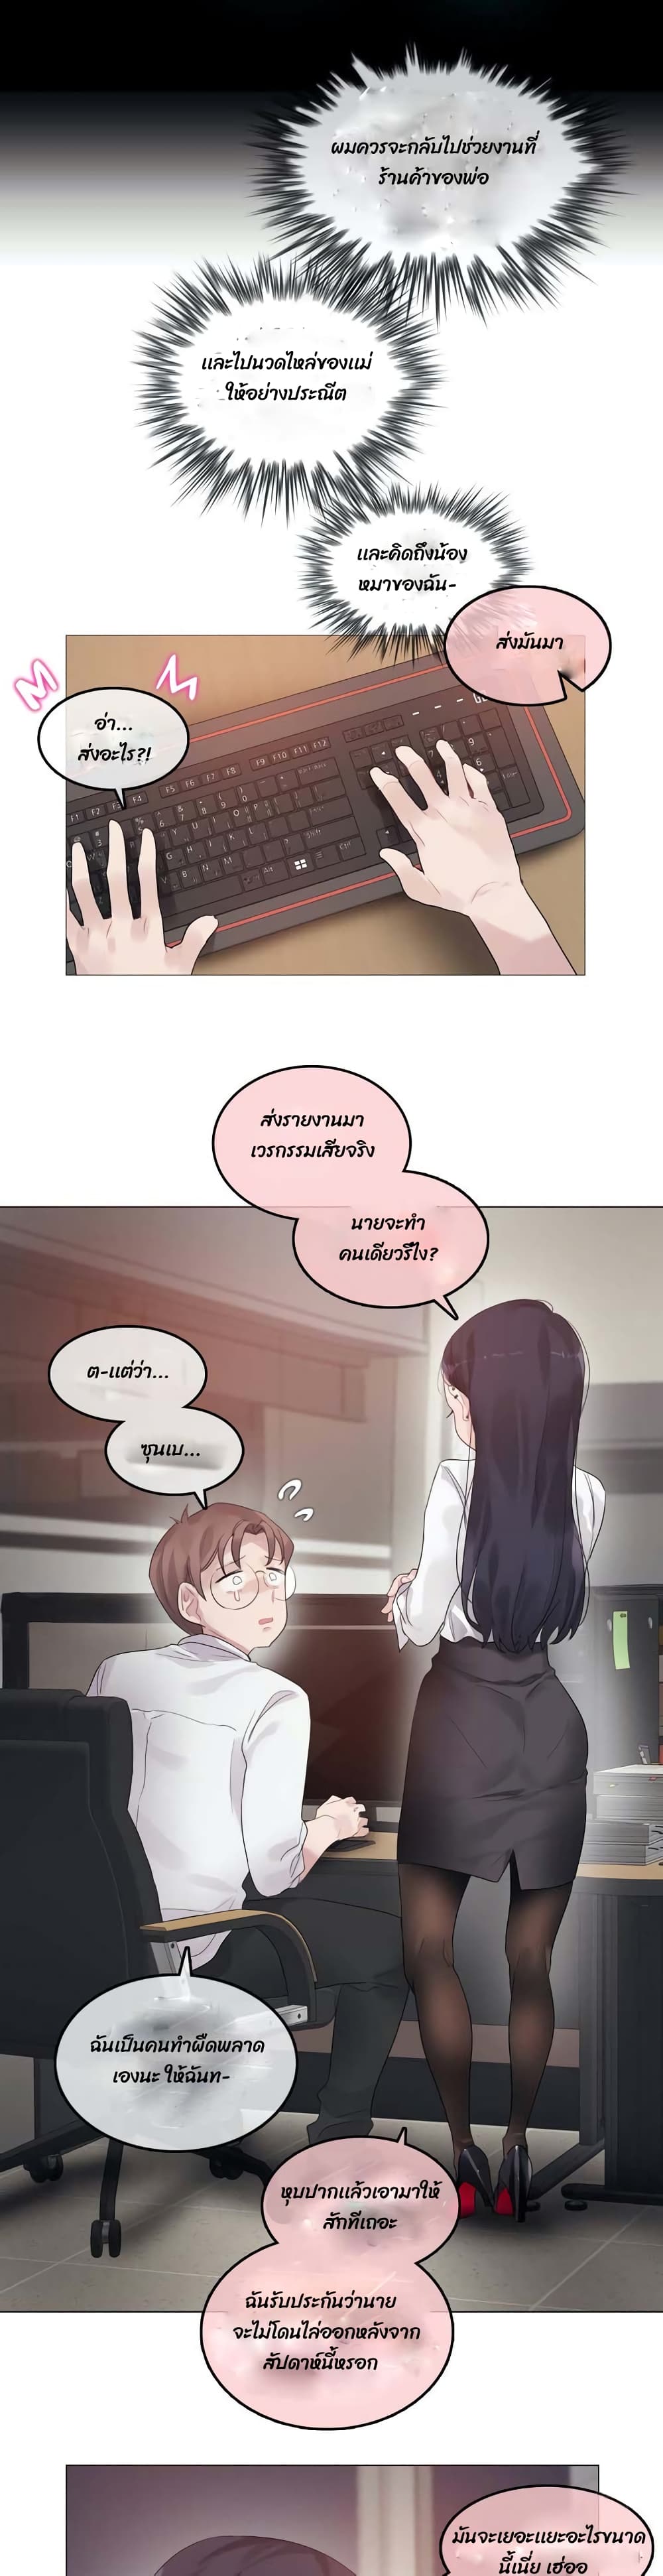 A Pervert's Daily Life 92 (22)